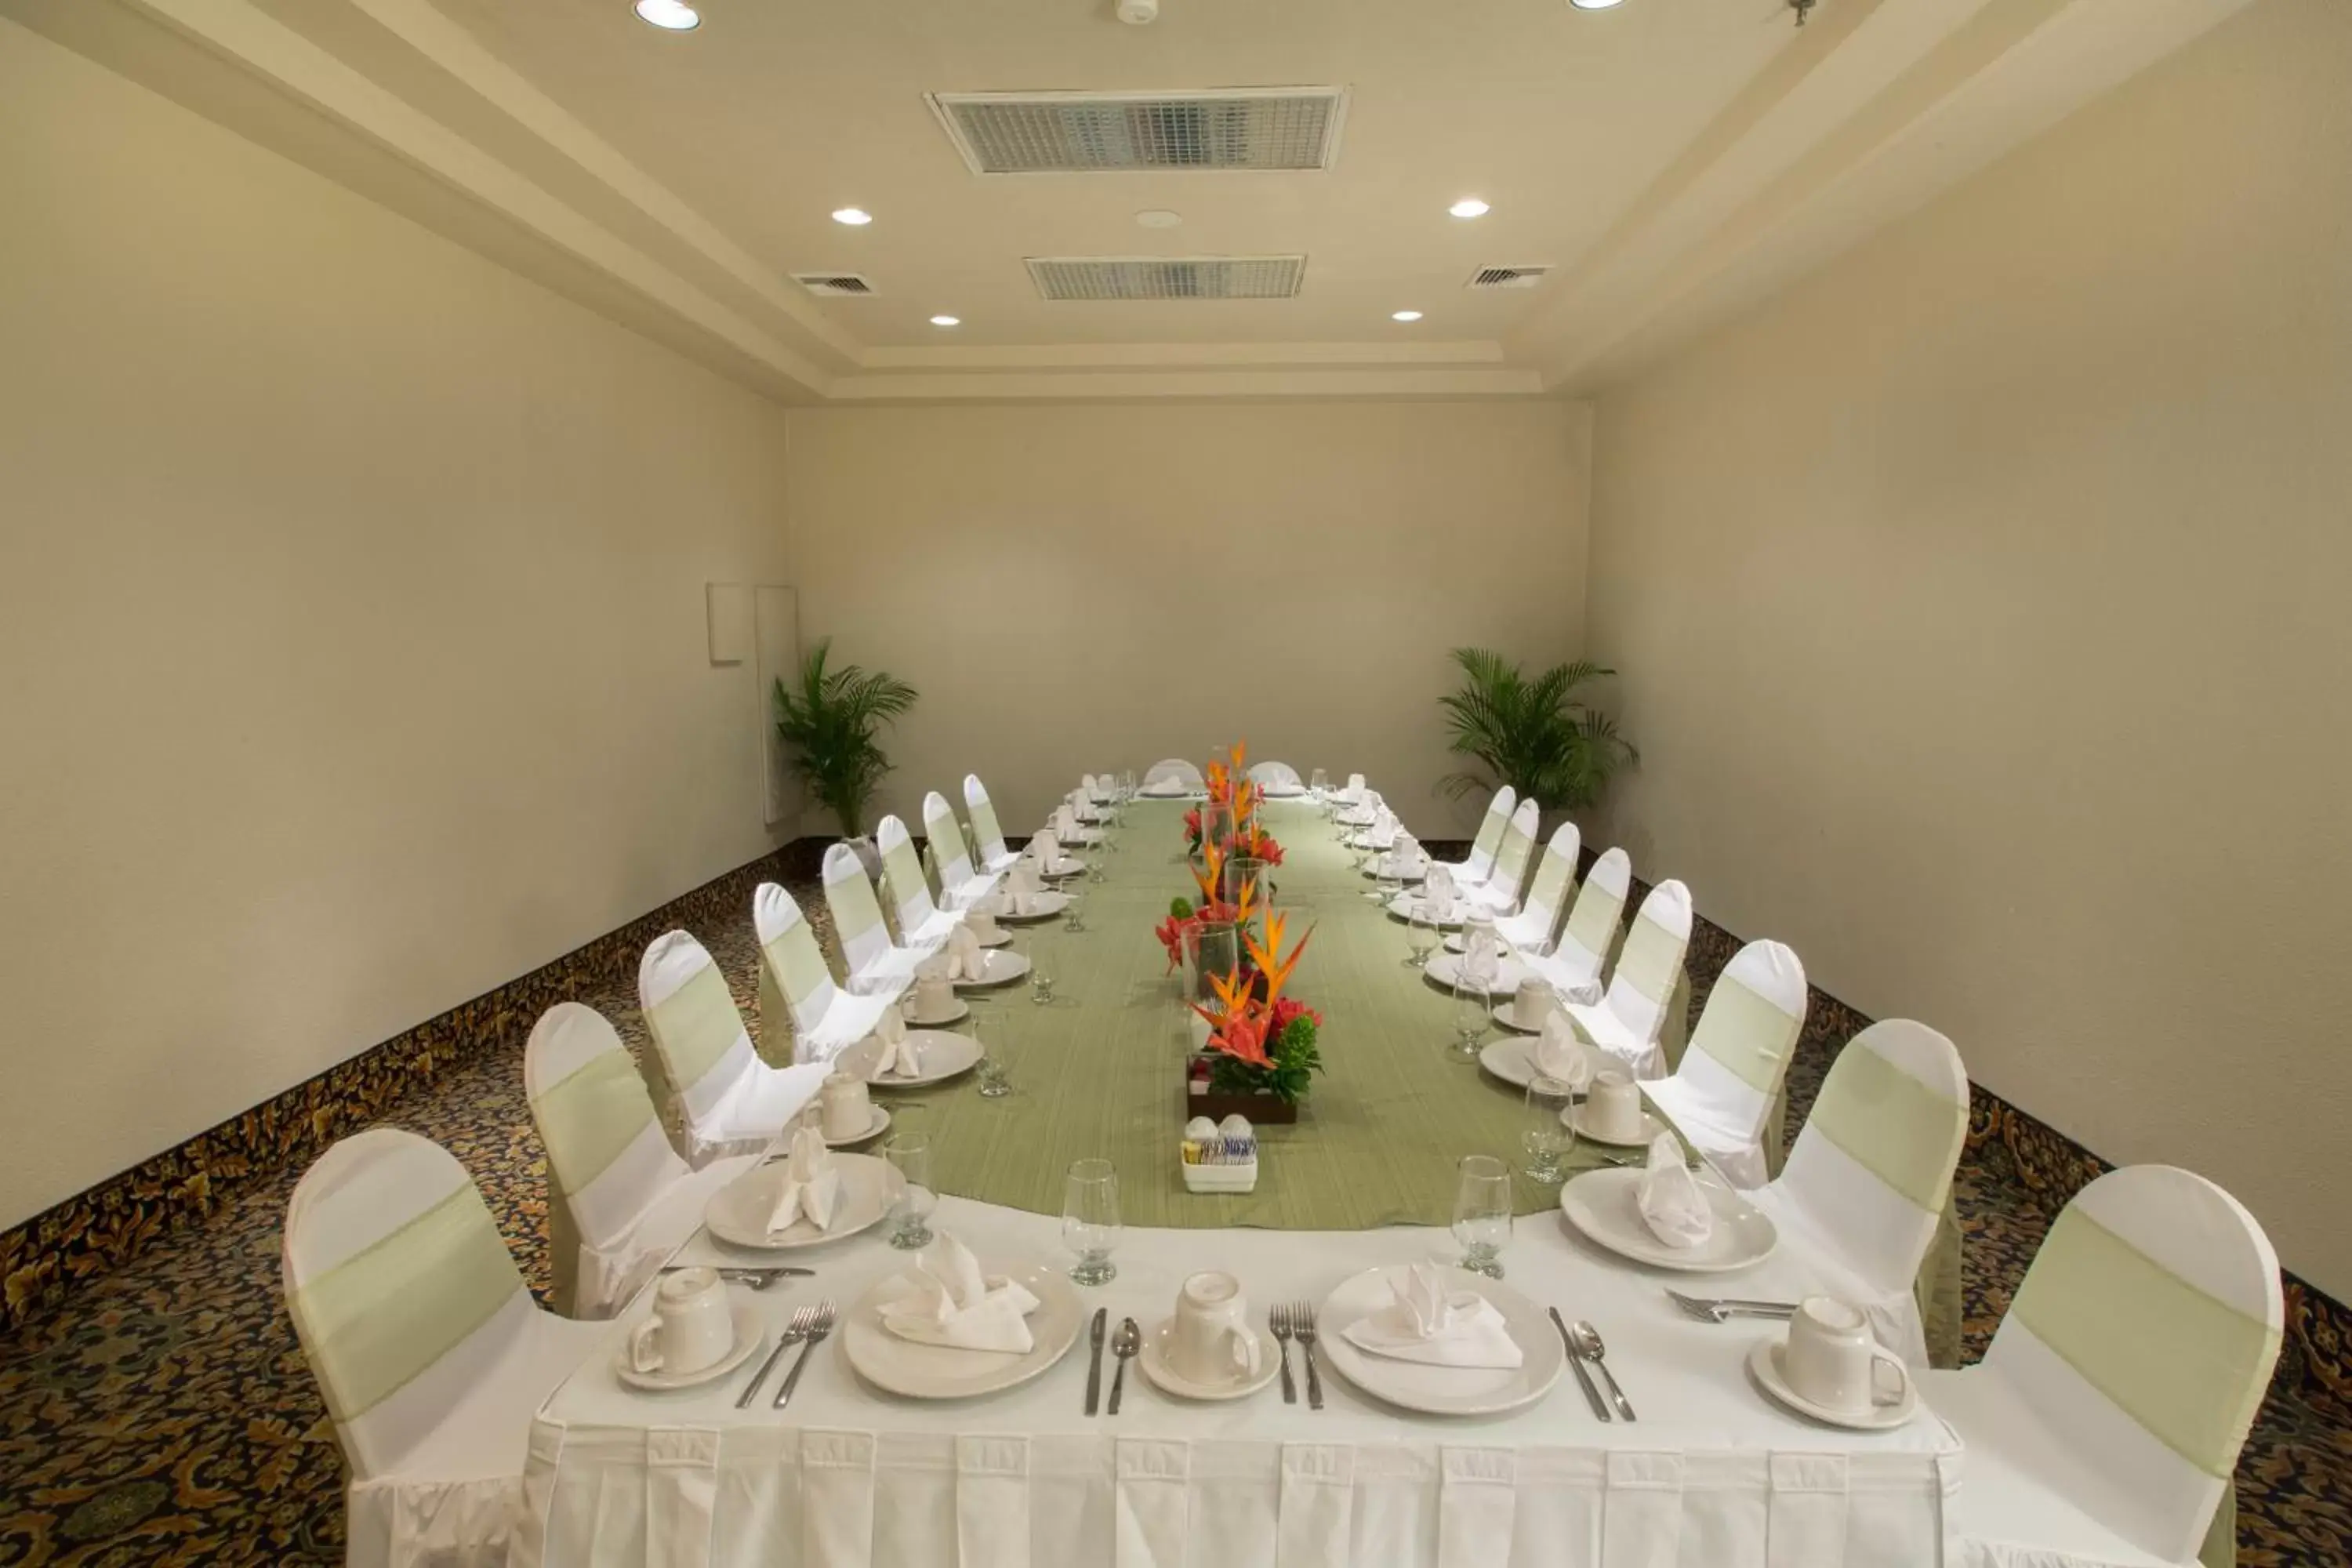 Meeting/conference room, Banquet Facilities in Barcelo Karmina - All Inclusive